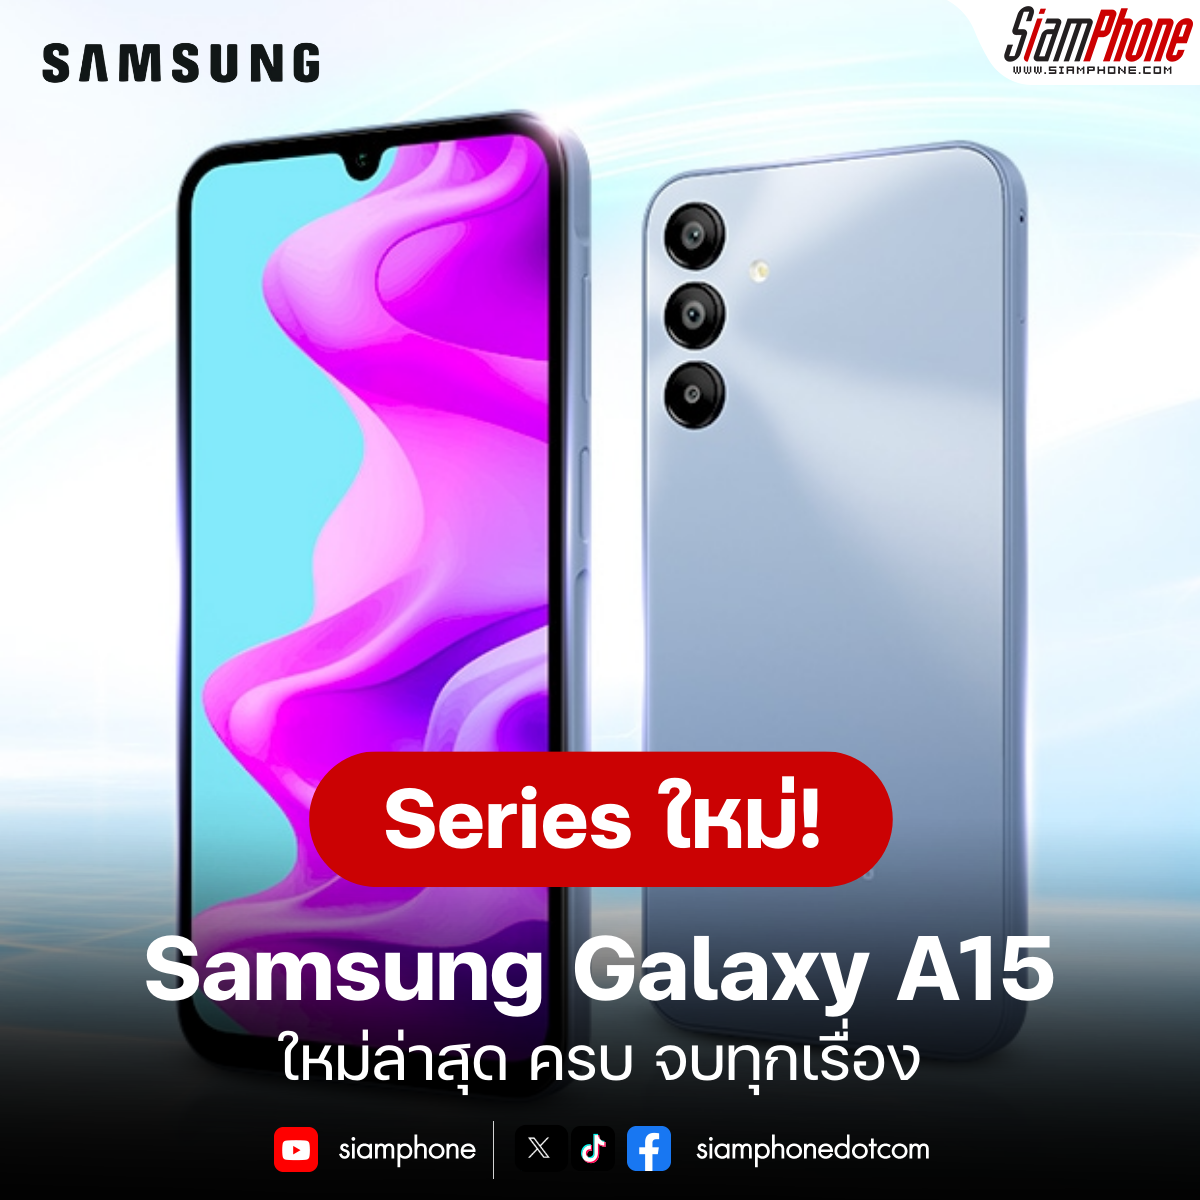 The latest Samsung Galaxy A15 series, complete with everything.